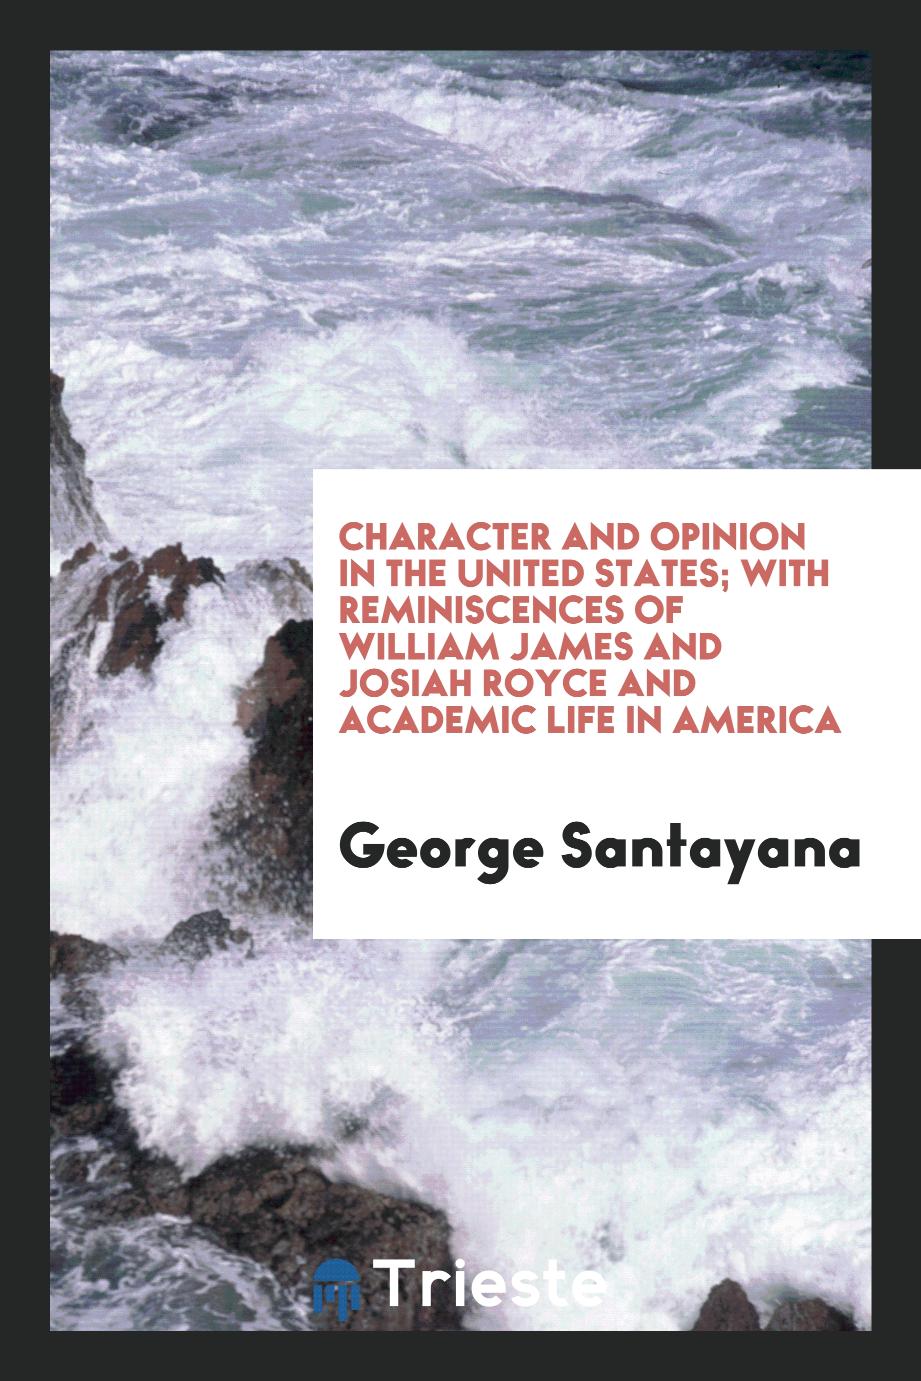 Character and opinion in the United States; with reminiscences of William James and Josiah Royce and academic life in America